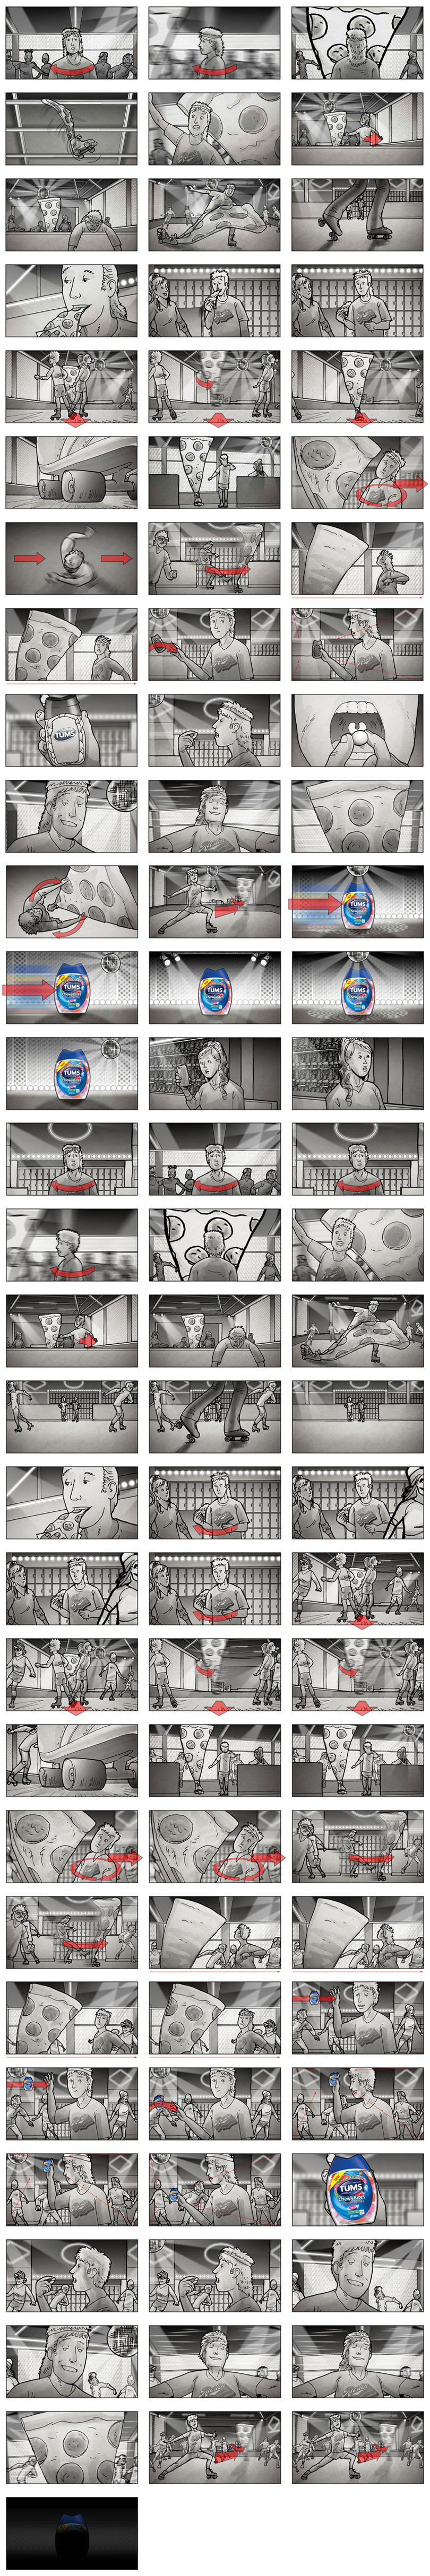 shooting boards Storyboards Advertising  TUMS Pizza